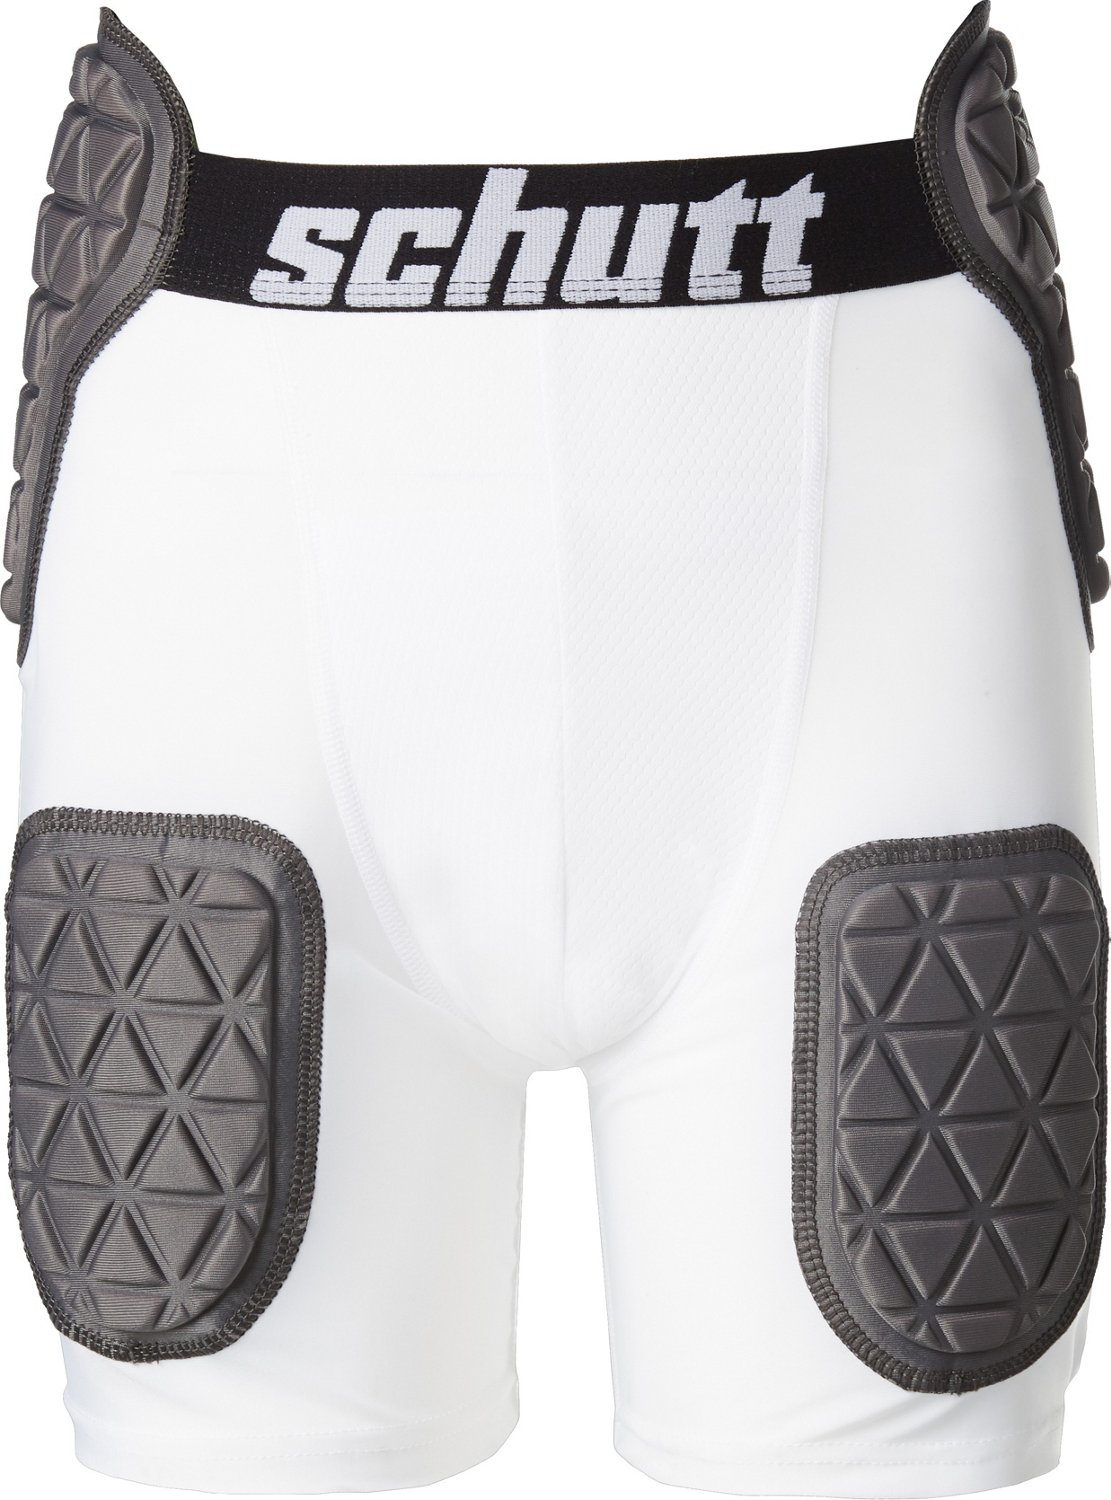 Schutt Sports Protech Youth All-in-One Football Girdle Black/Gray Small 